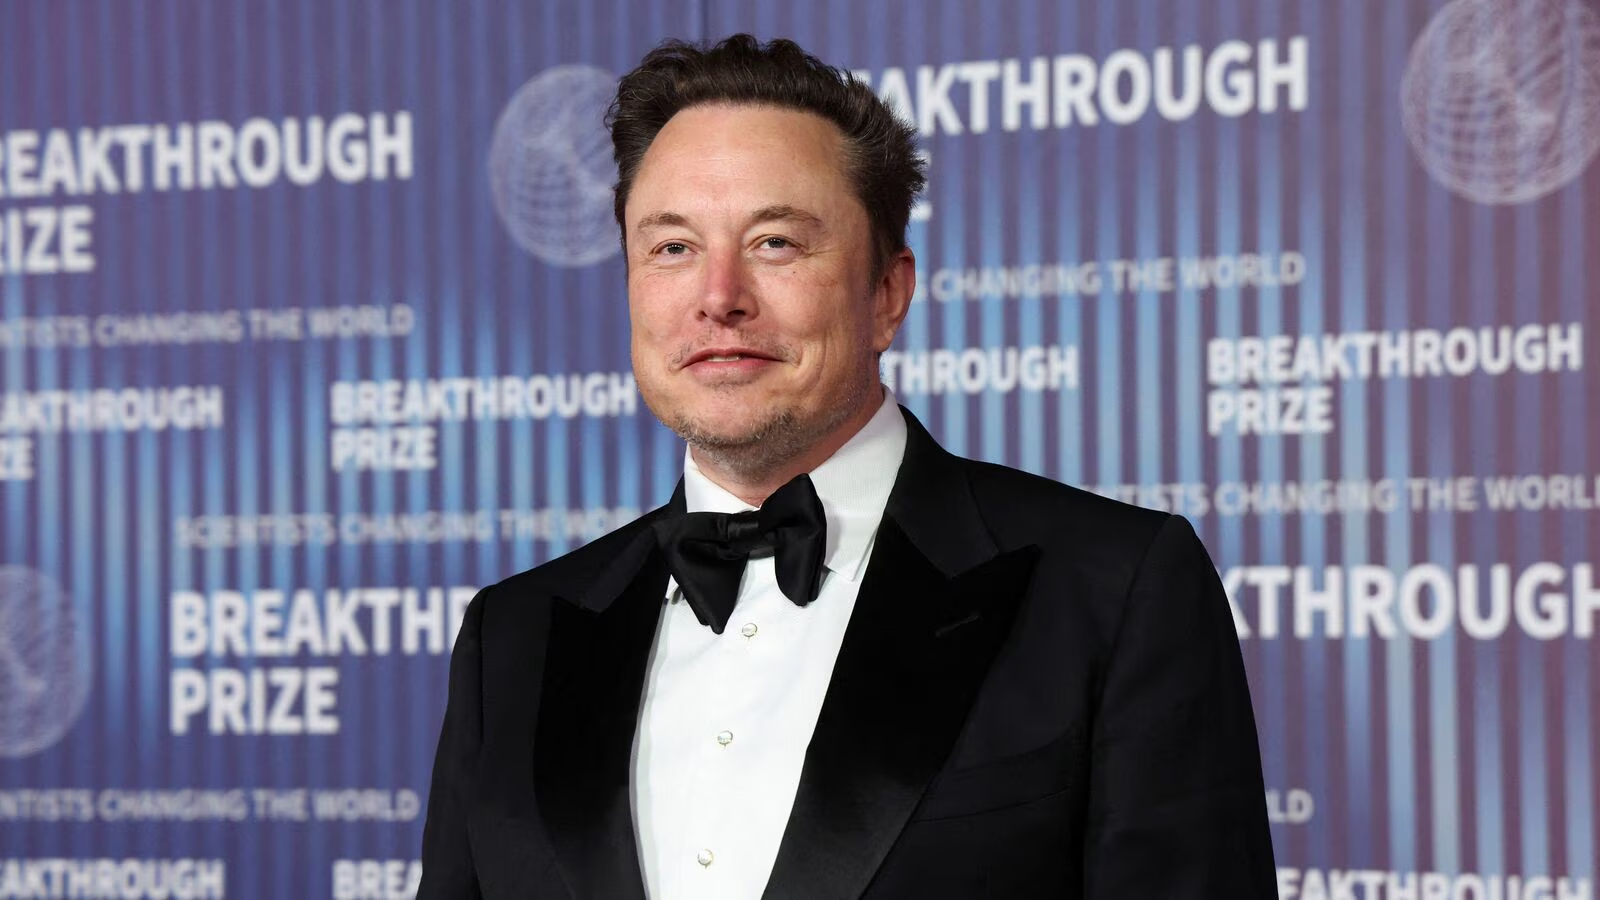 Elon Musk Likely to Postpone India Visit Amidst Tesla’s Critical Quarter Review